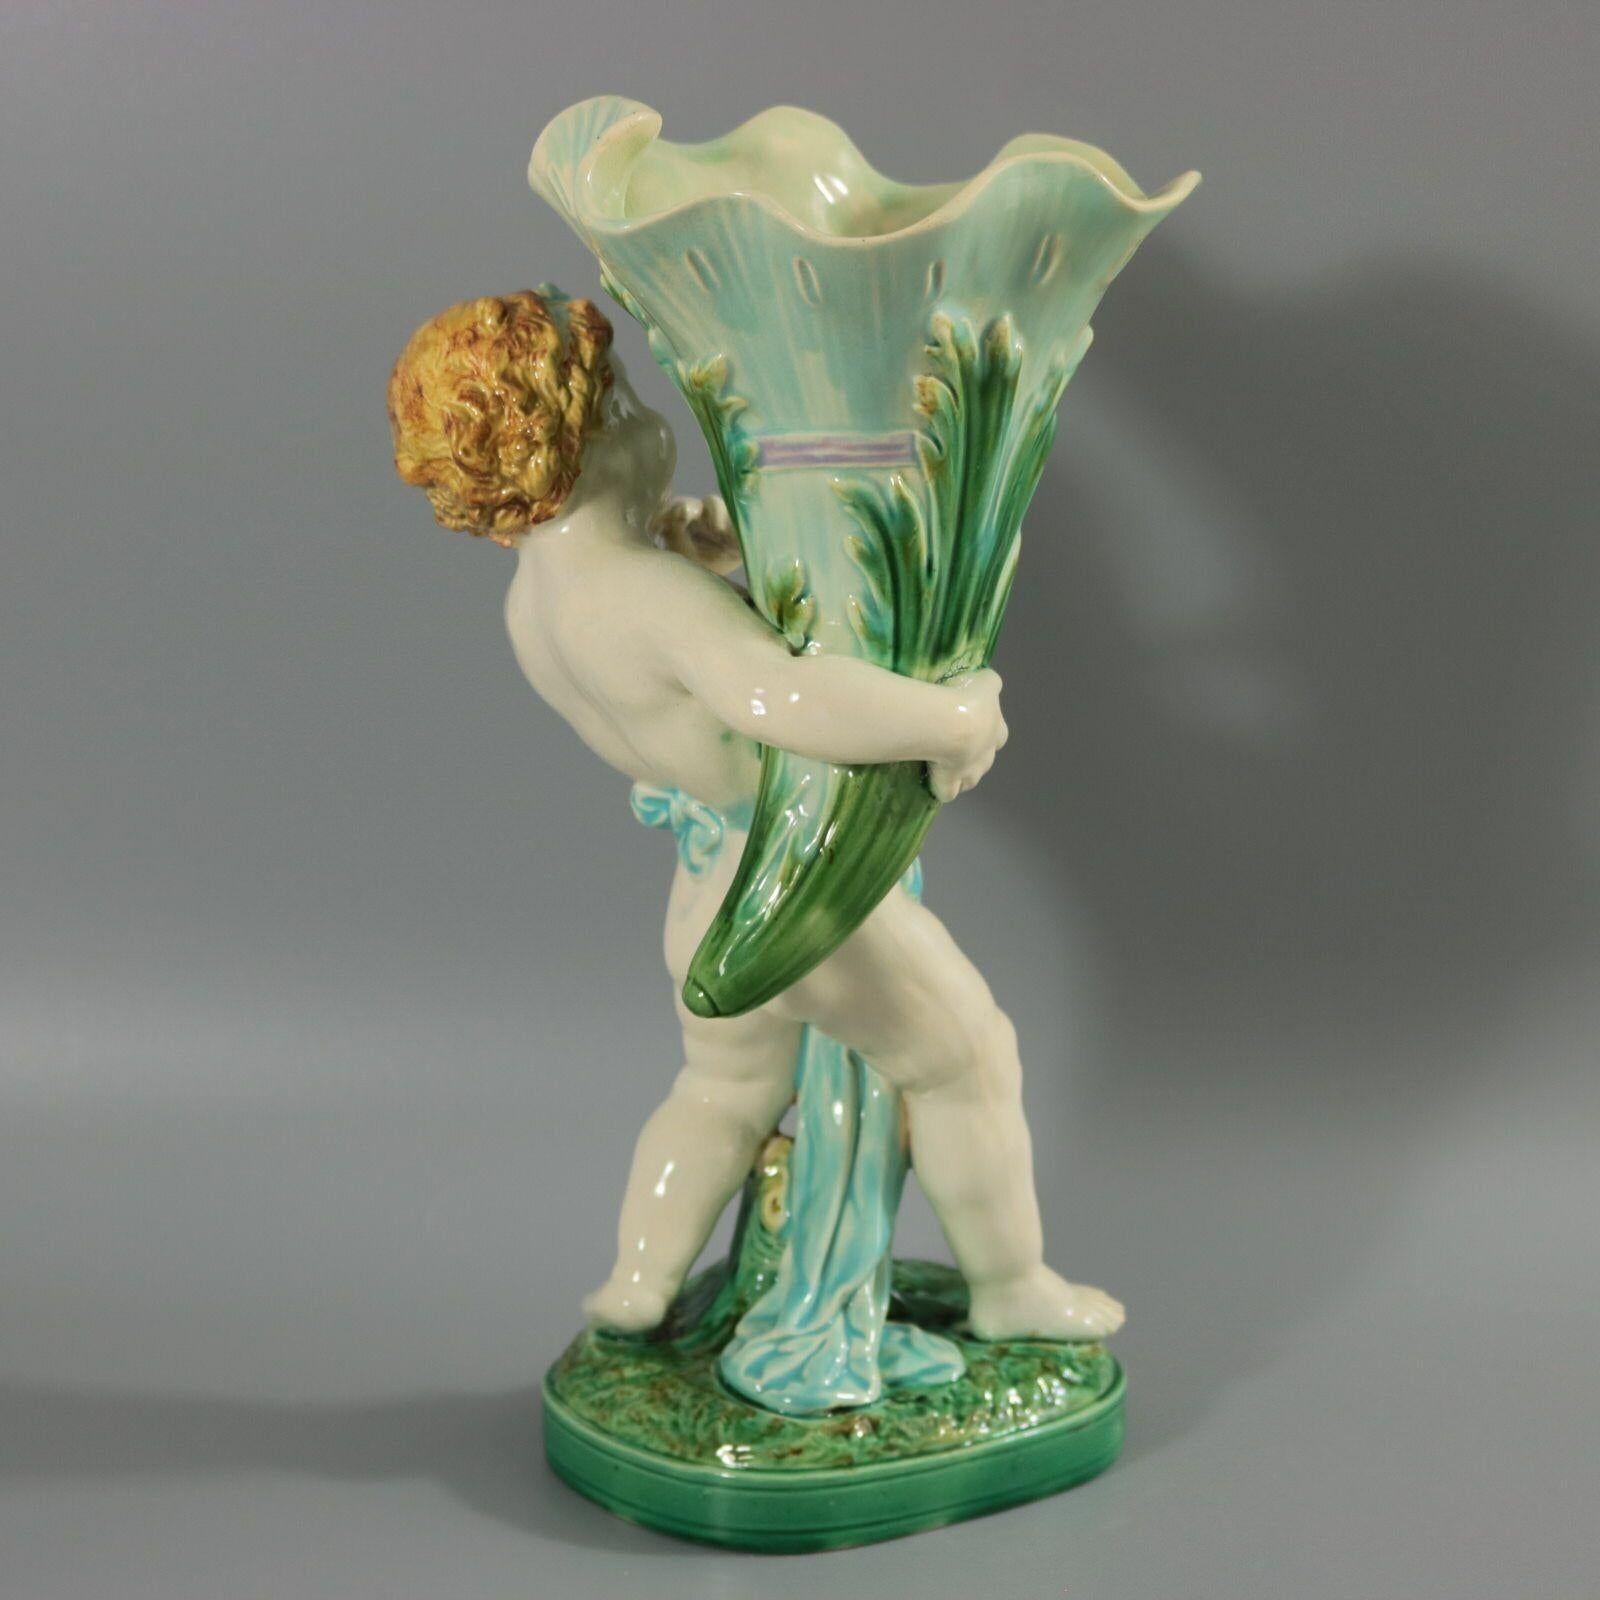 Mintons Majolica Putti Flower Holder Vase In Good Condition For Sale In Chelmsford, Essex